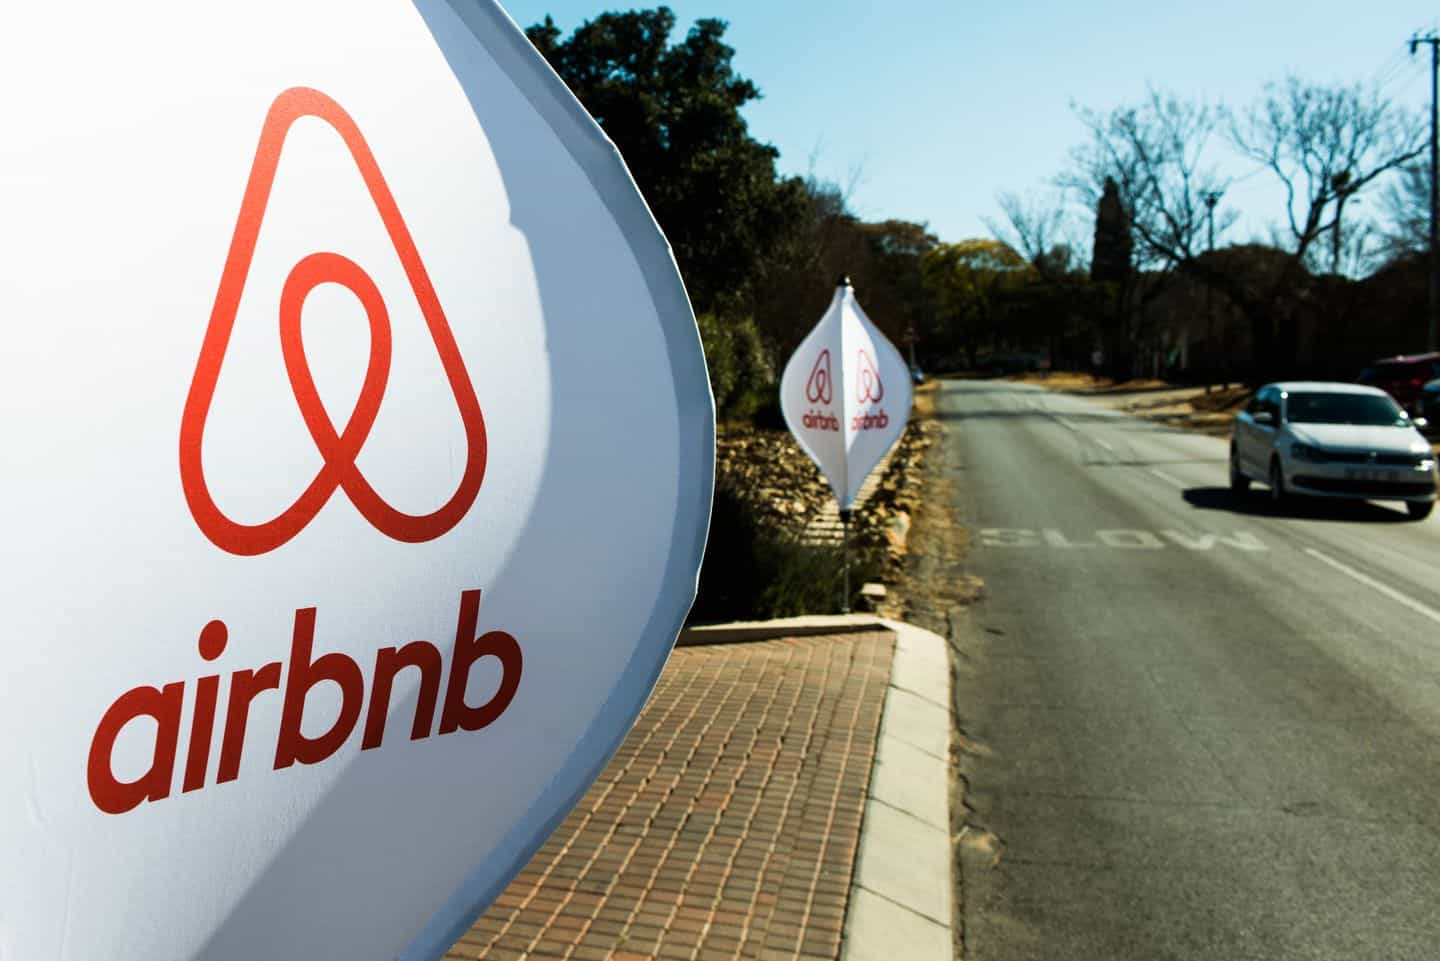 New Bills About Vacation Rentals To Restrict Airbnb, House Parties